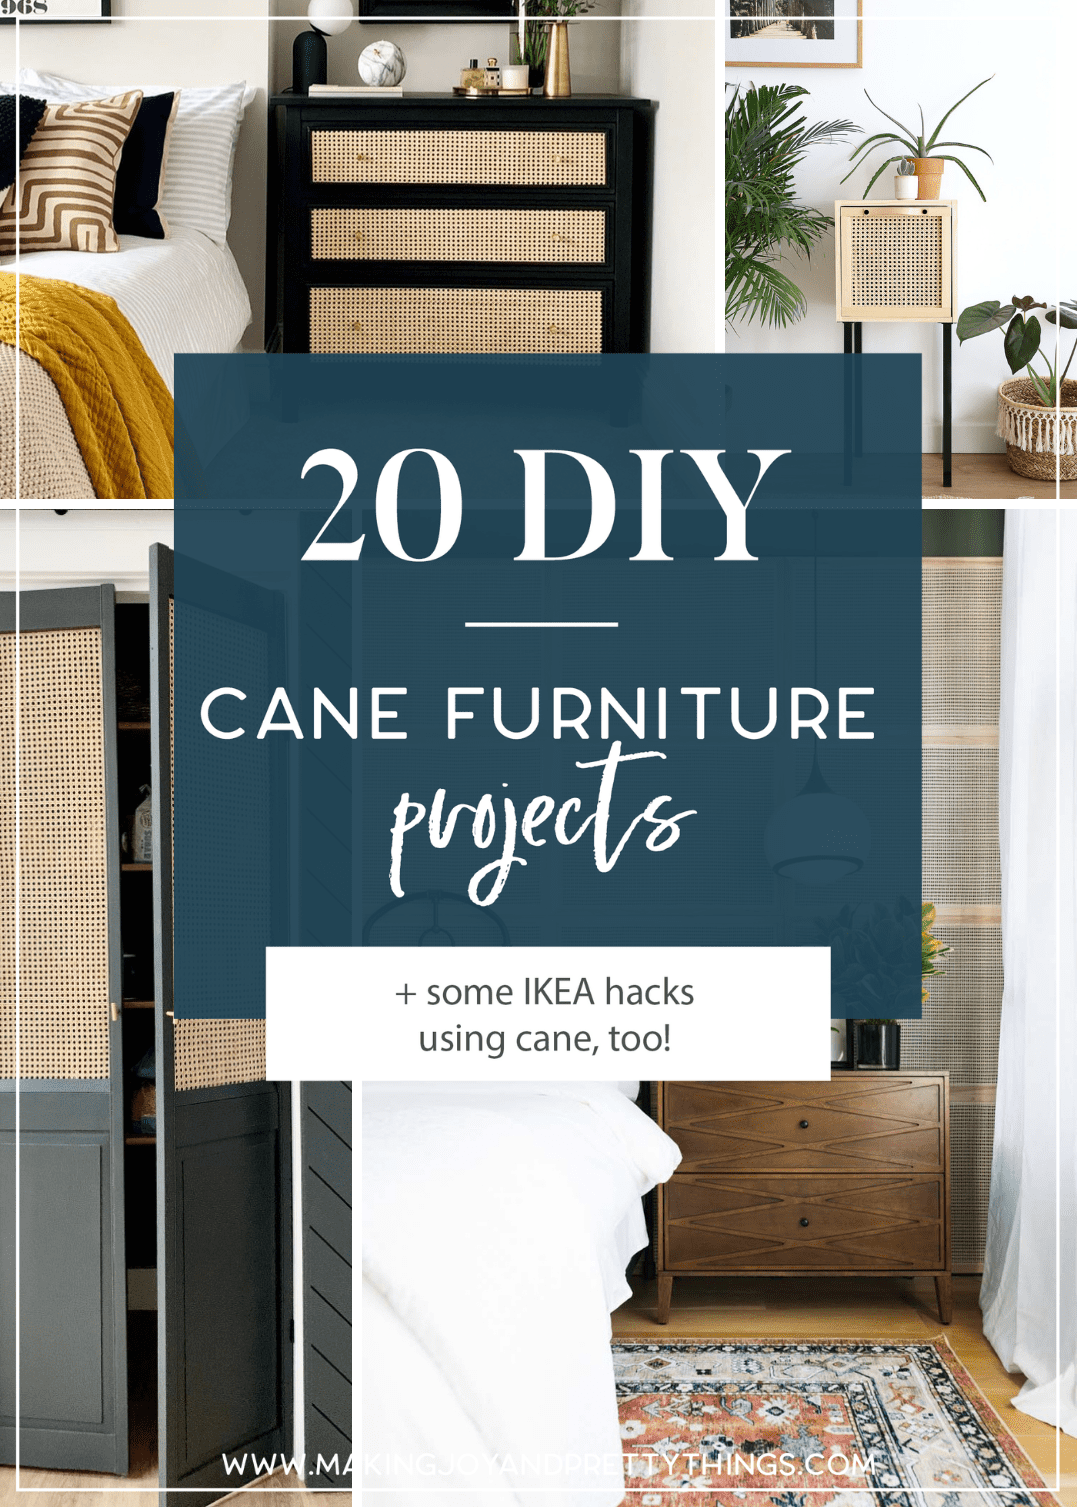 Chatting about a design trend that I’m loving - DIY cane furniture!  If you’re looking to add an organic, natural look to your living room, dining room, or bedroom that goes with any design style, cane furniture is perfect!  Sharing so many different DIY cane furniture pieces including some great IKEA hacks.  There is a DIY cane headboard, DIY cane cabinet, DIY cane dresser, DIY cane bed, DIY cane doors and so much more!  So many beautiful DIY cane furniture pieces that you’re sure to be inspired to create yourself. #cane #canefurniture #diycanefurniture 